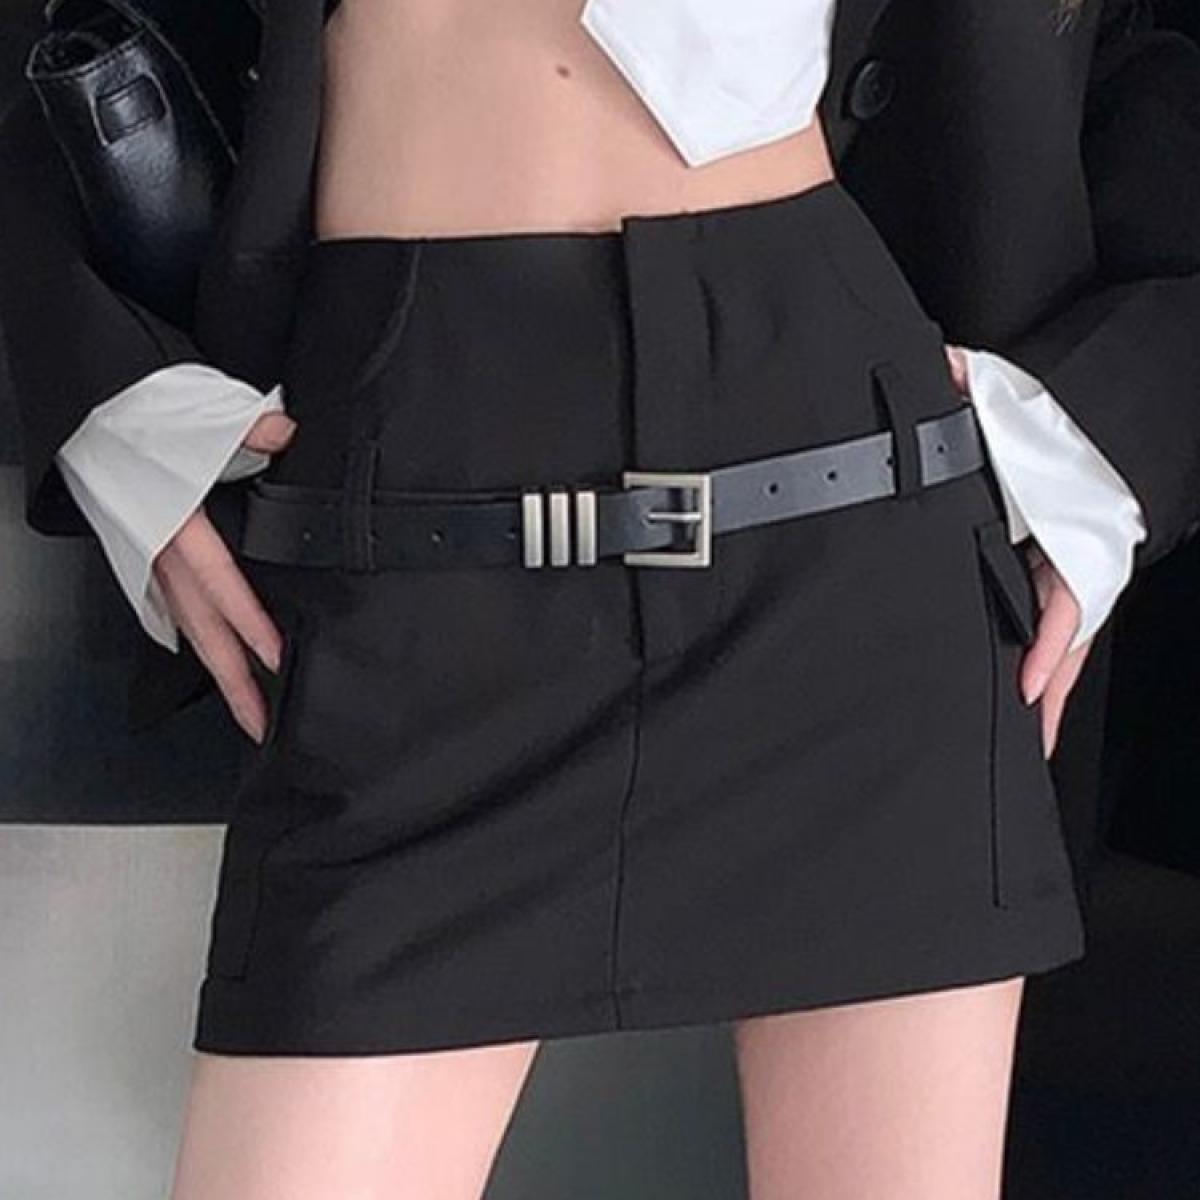 Skirts Women Belt Cool Leisure Stylish Personality  Style Simple Ladies Streetwear All Match Daily Summer Classics Popul